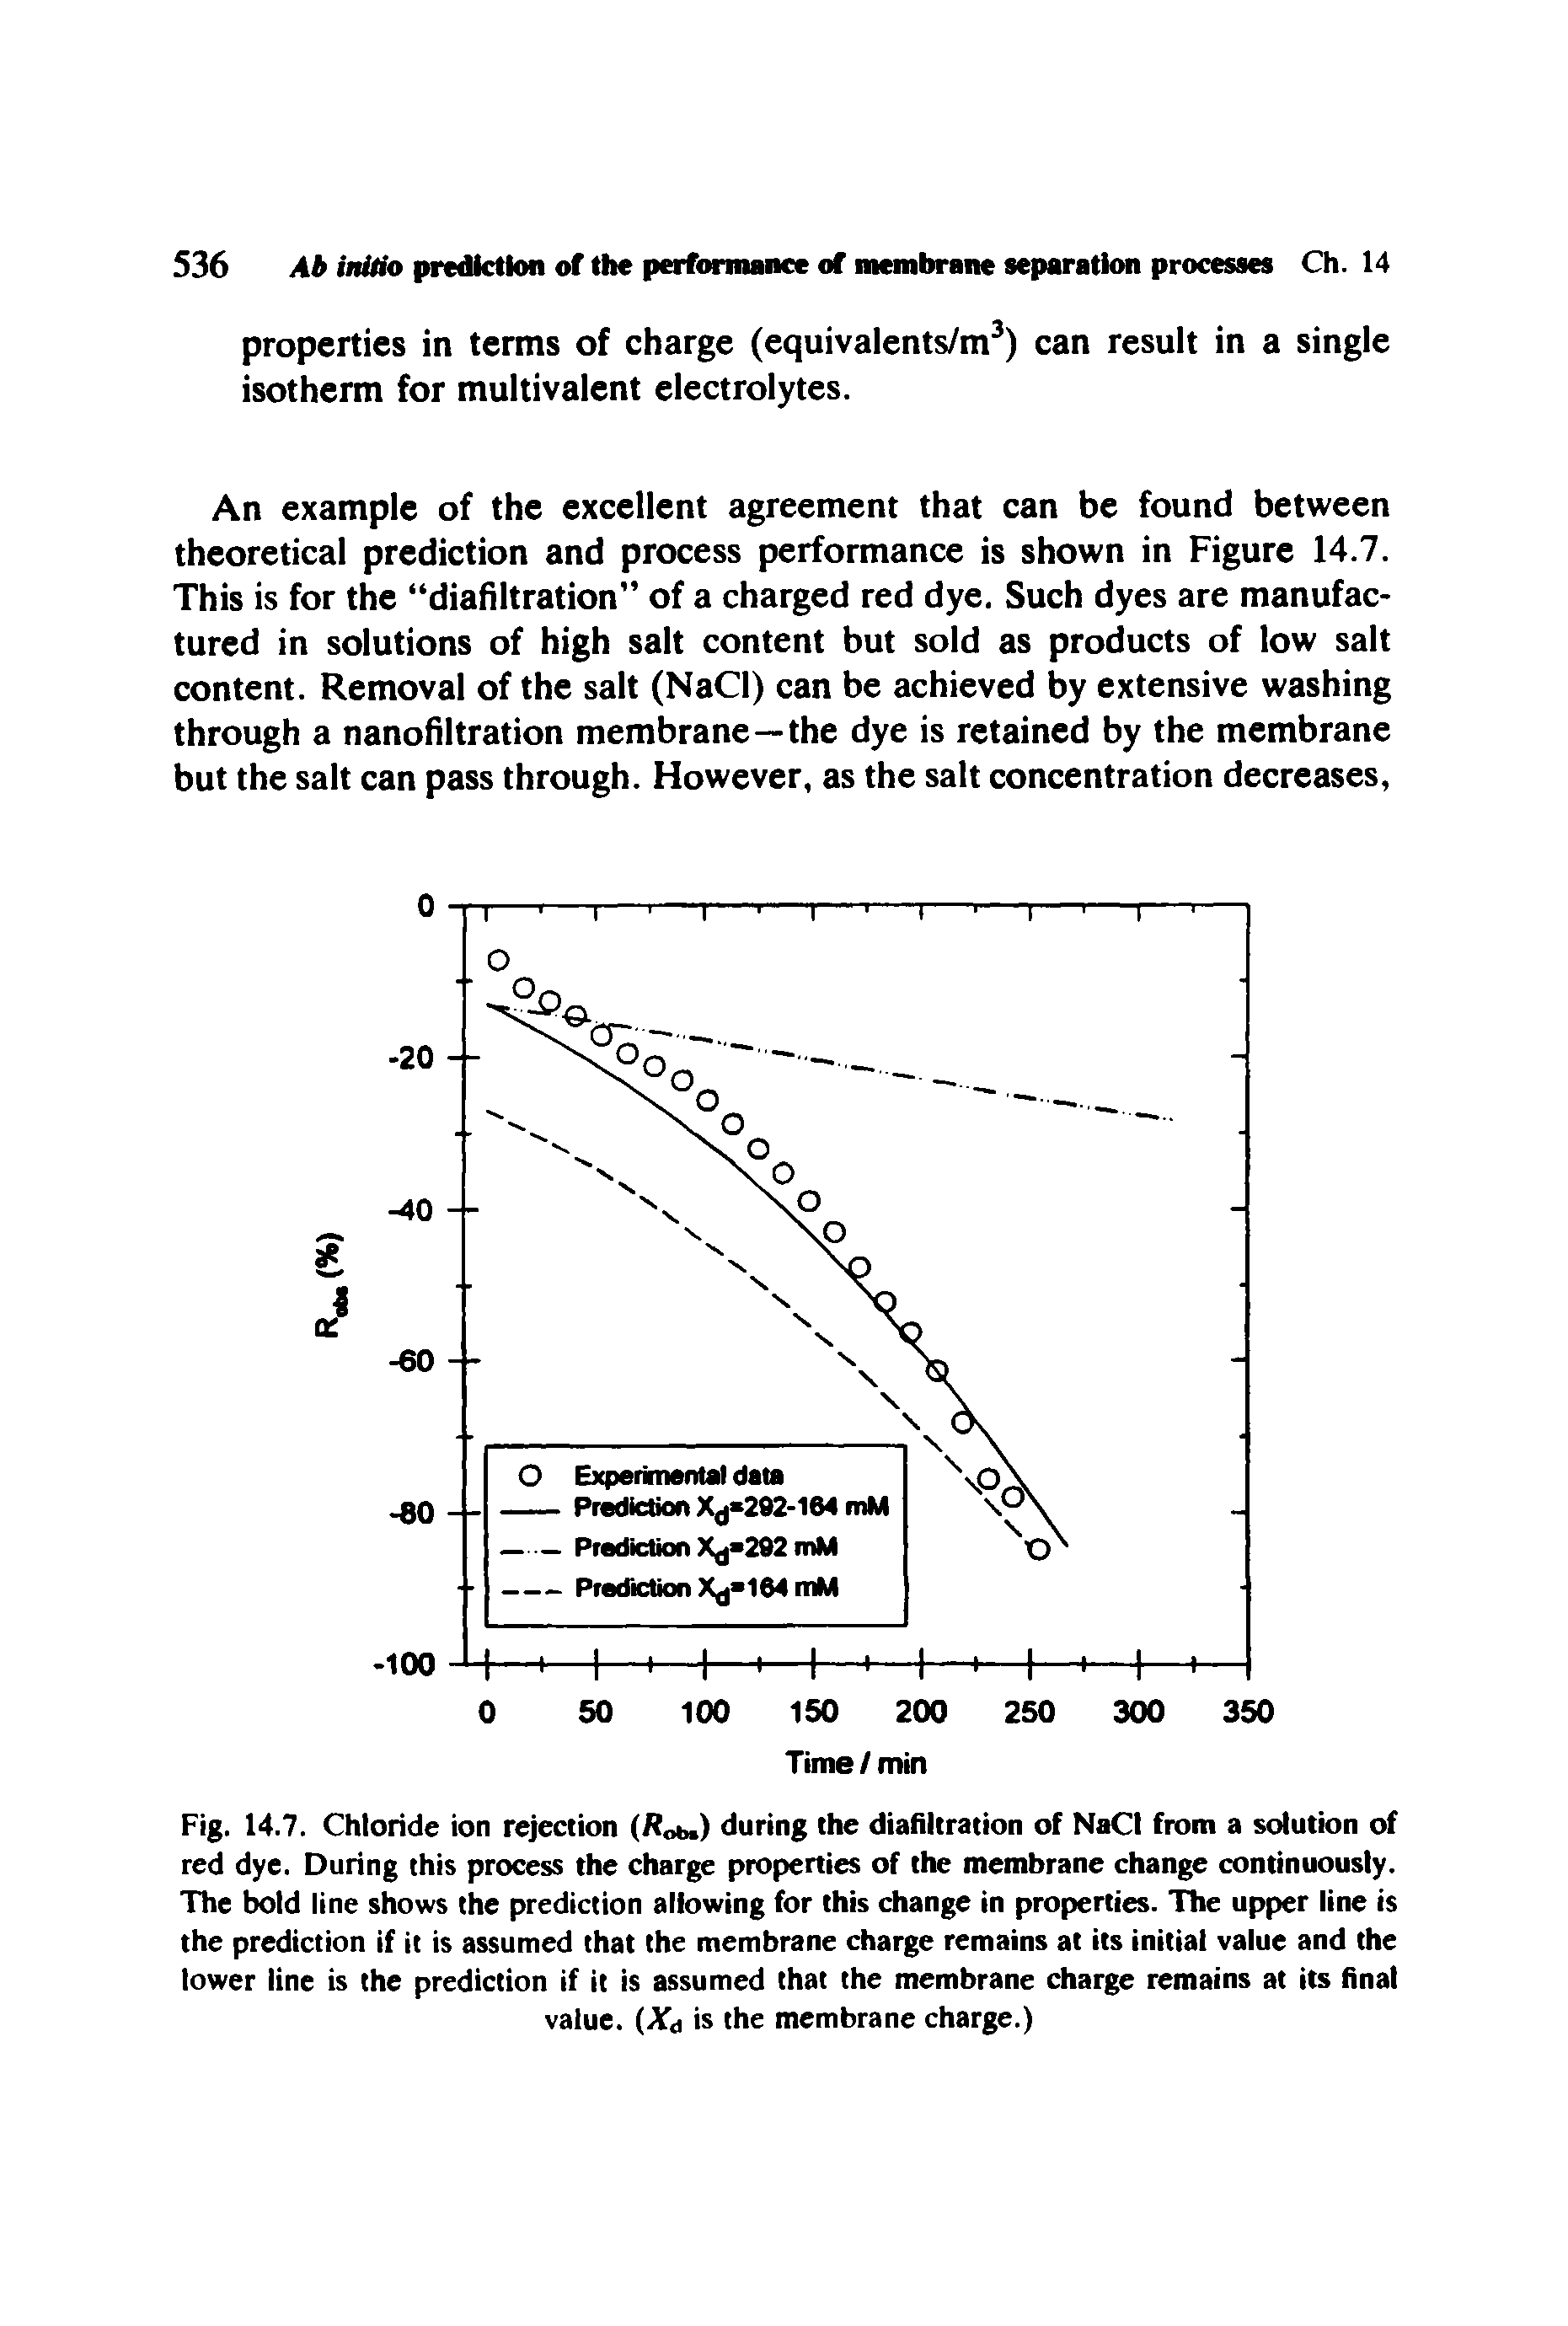 Fig. 14.7. Chloride ion rejection (Rob.) during the diafiltration of NaCl from a solution of red dye. During this process the charge properties of the membrane change continuously. The bold line shows the prediction allowing for this change in properties. The upper line is the prediction if it is assumed that the membrane charge remains at its initial value and the lower line is the prediction if it is assumed that the membrane charge remains at its final value. (Xa is the membrane charge.)...